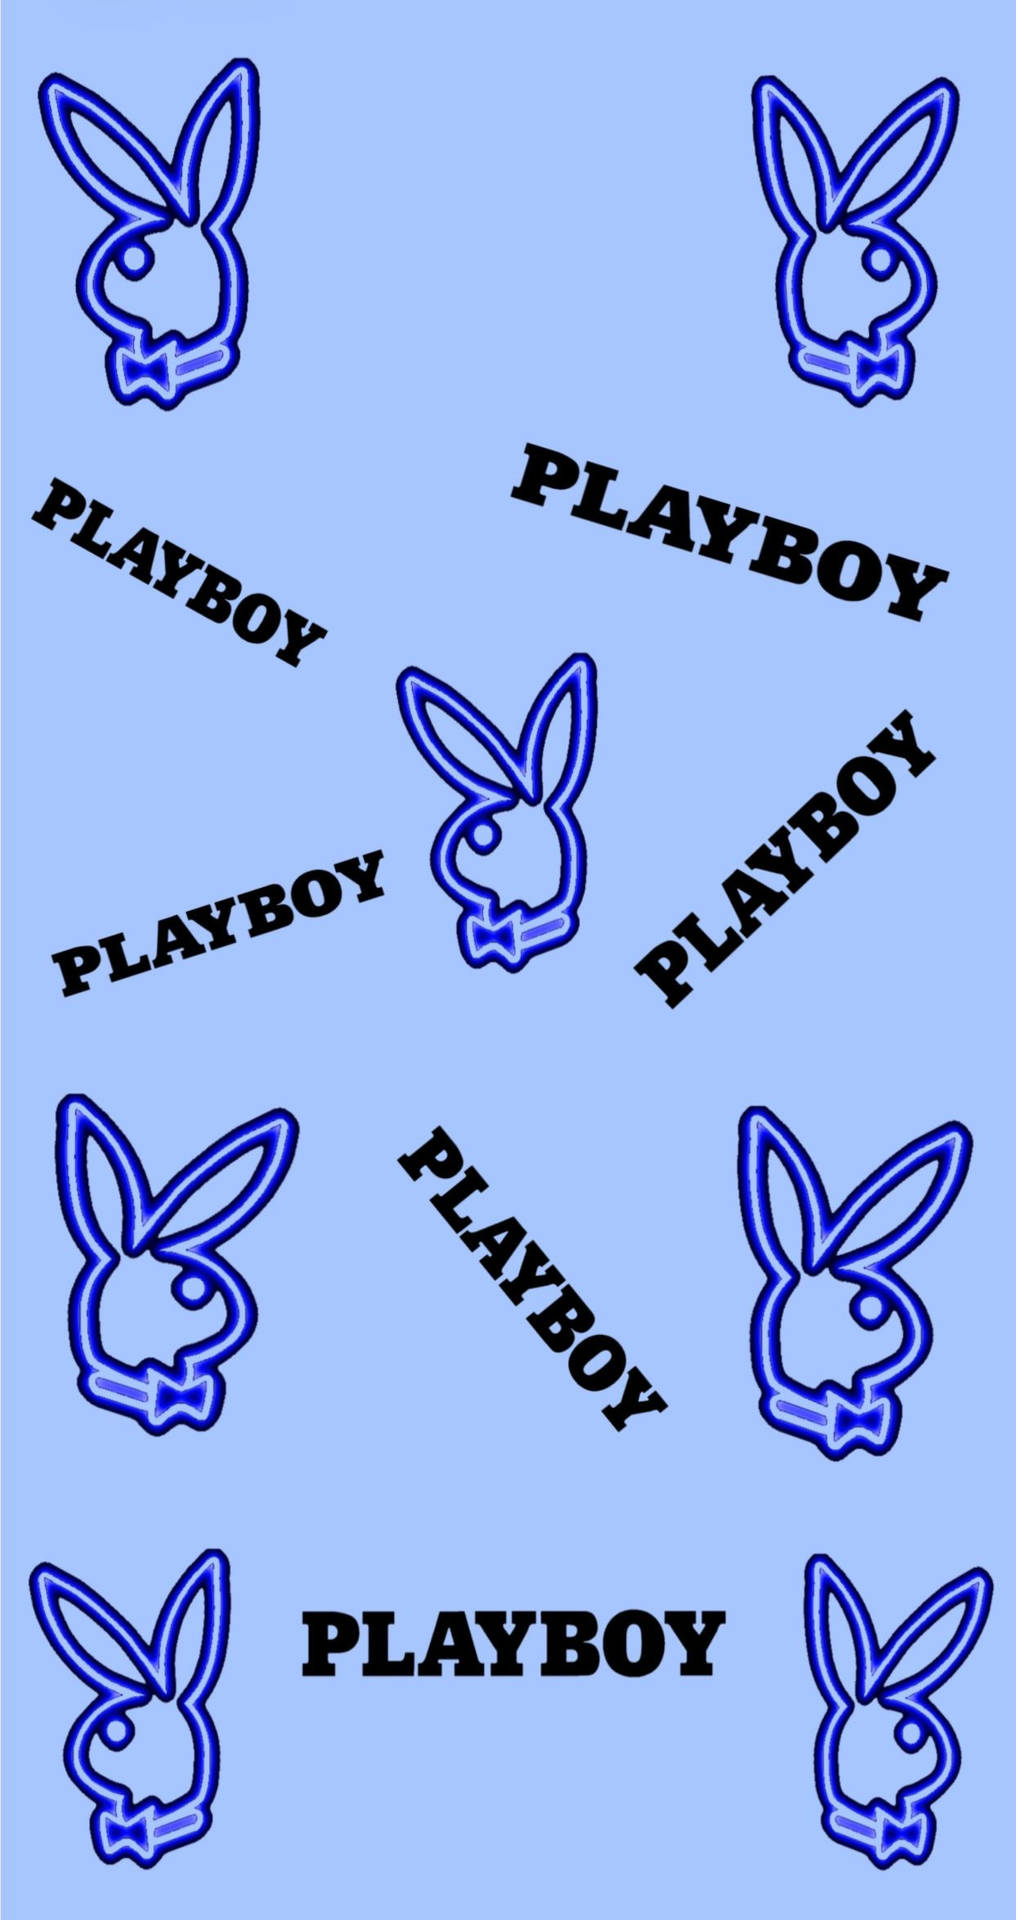 Free Playboy Wallpaper Downloads, [100+] Playboy Wallpapers for FREE |  